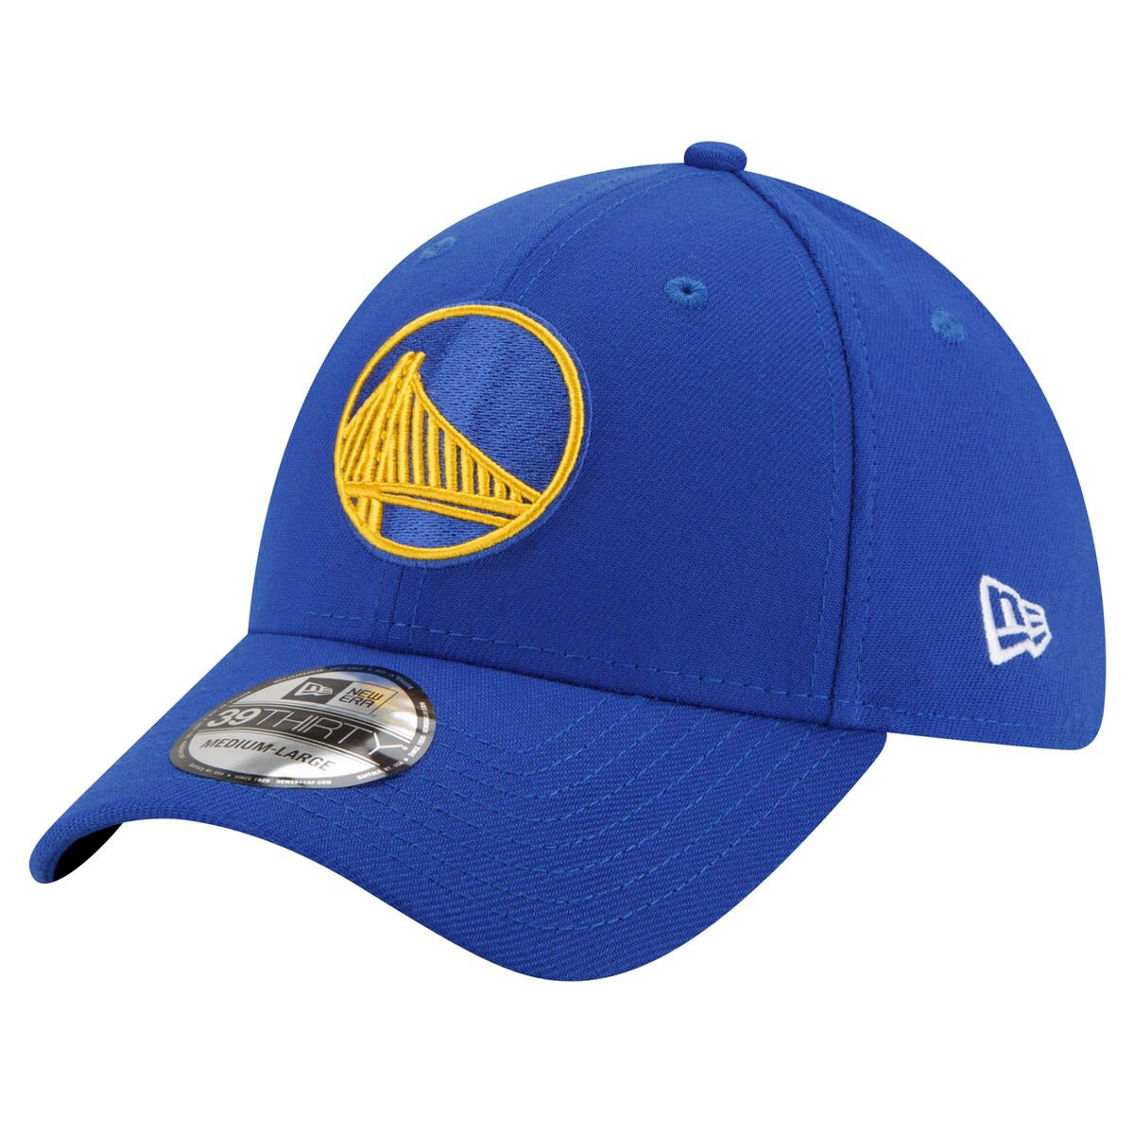 New Era Men's Royal Golden State Warriors Official Team Color 39THIRTY Flex Hat - Image 2 of 4